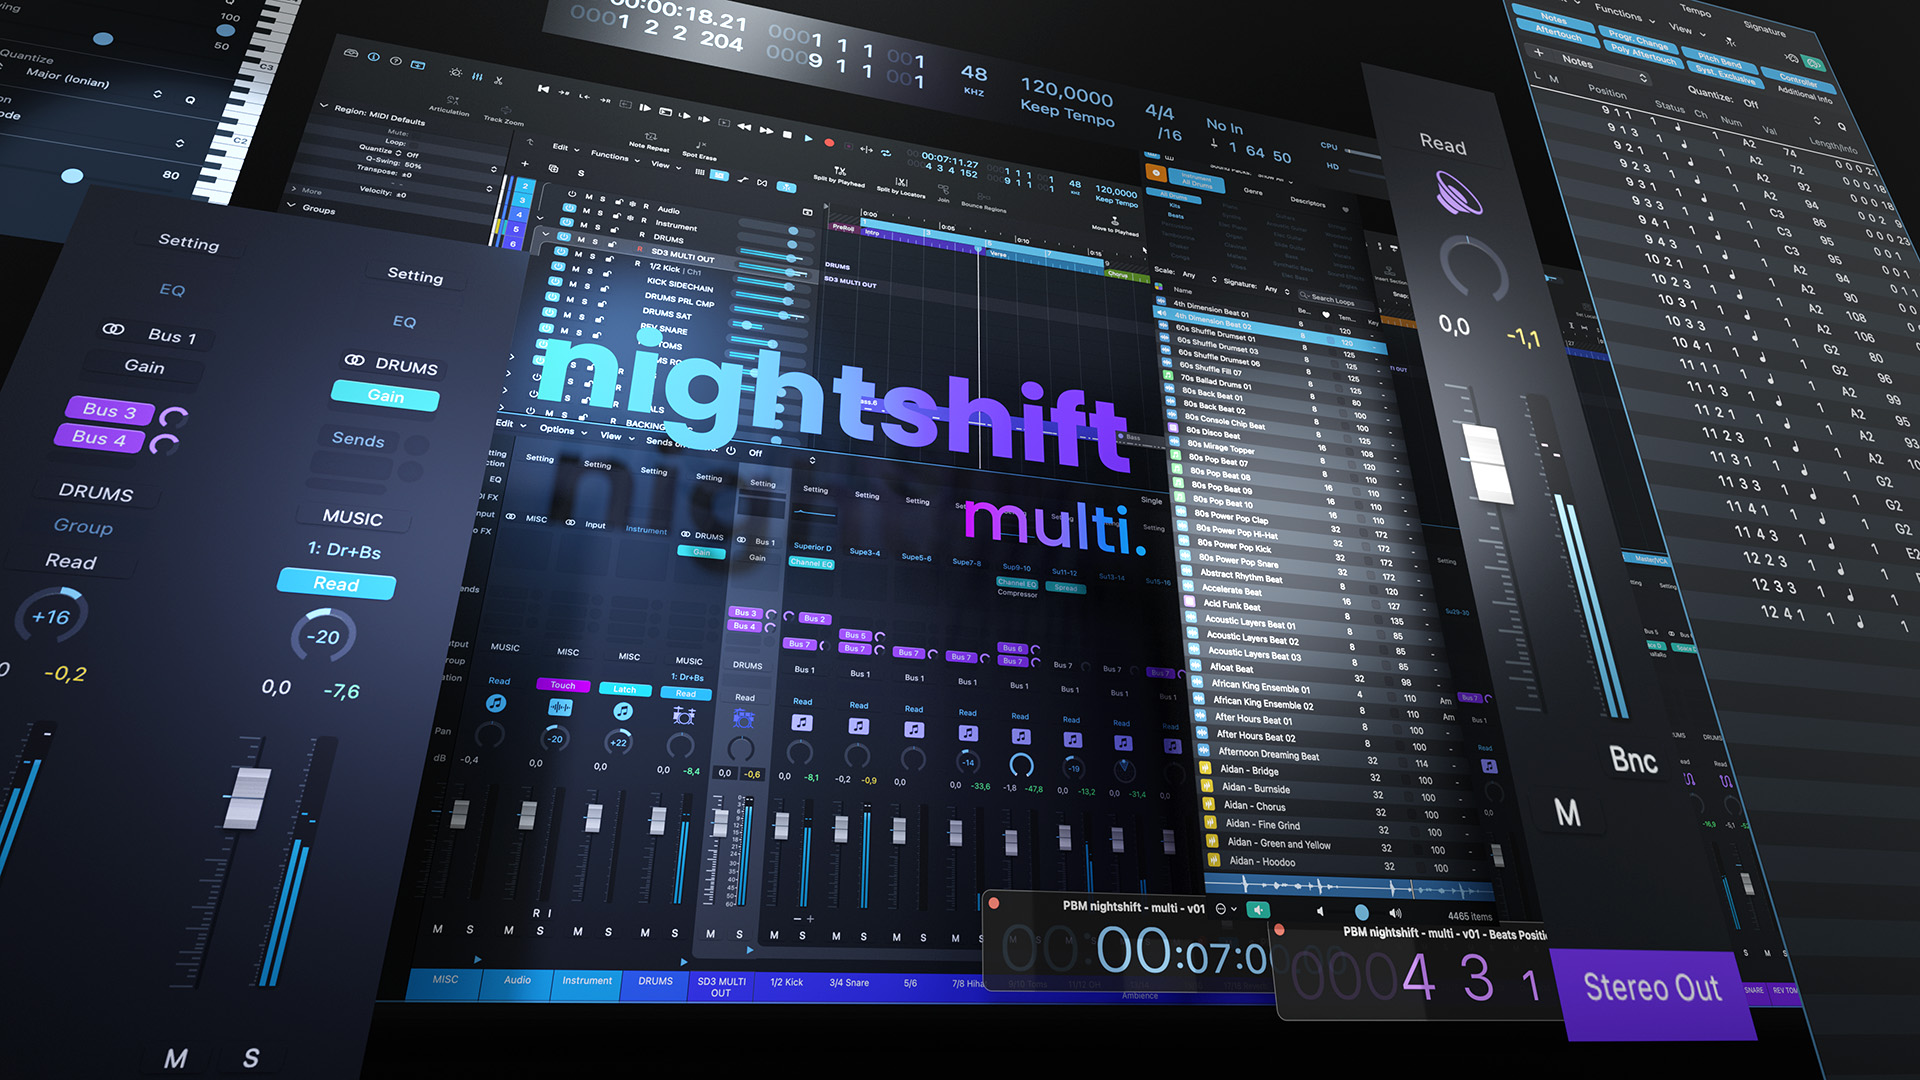 "Nightshift: Multi." Various views of a handcrafted dark mode theme for Apple's DAW Logic Pro, created by Phil Bauch.